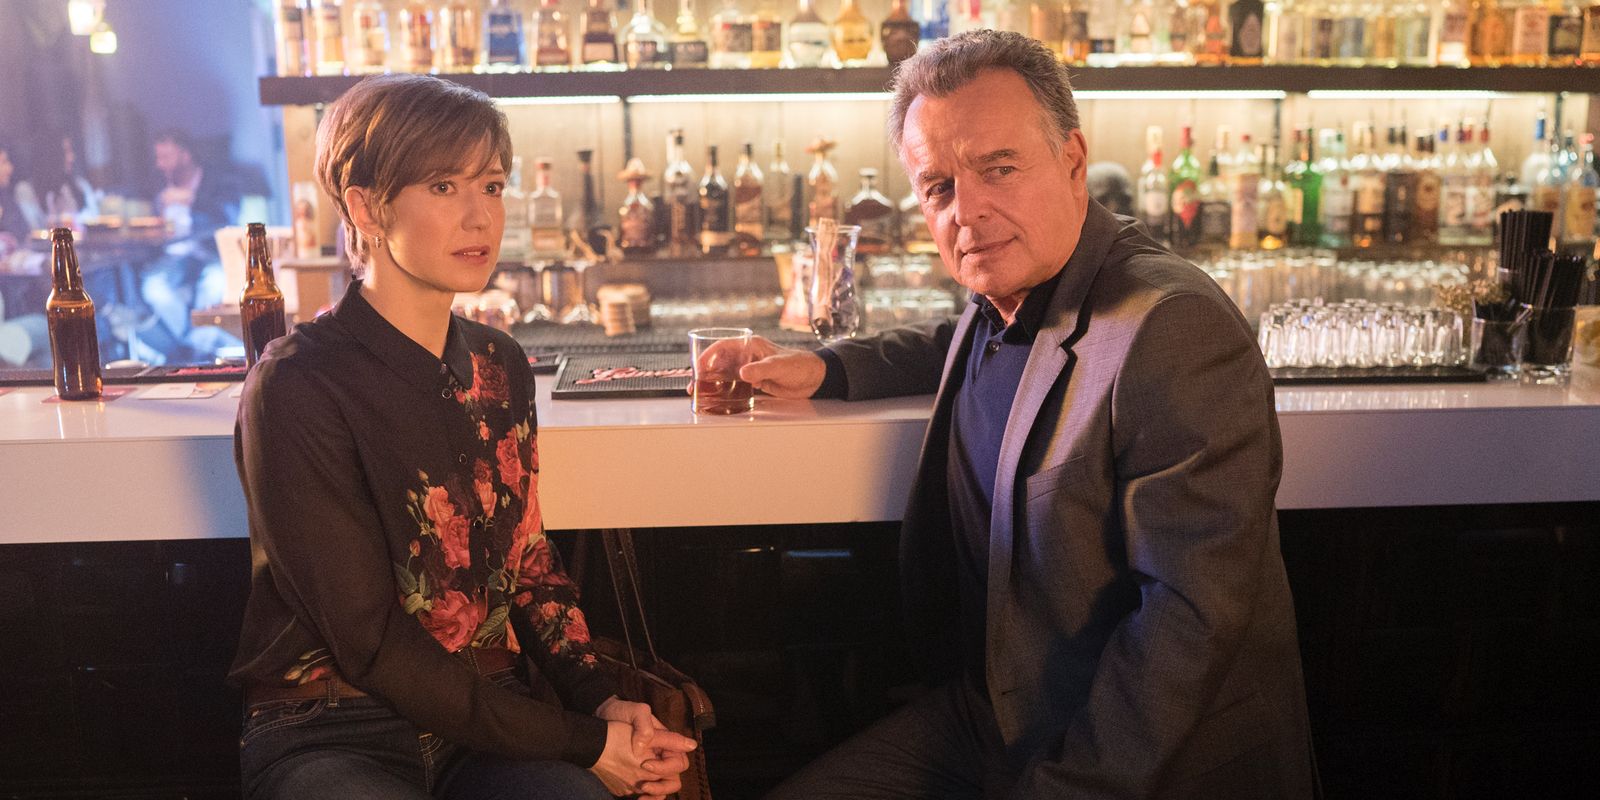 Carrie Coon and Ray Wise in Fargo Season 3